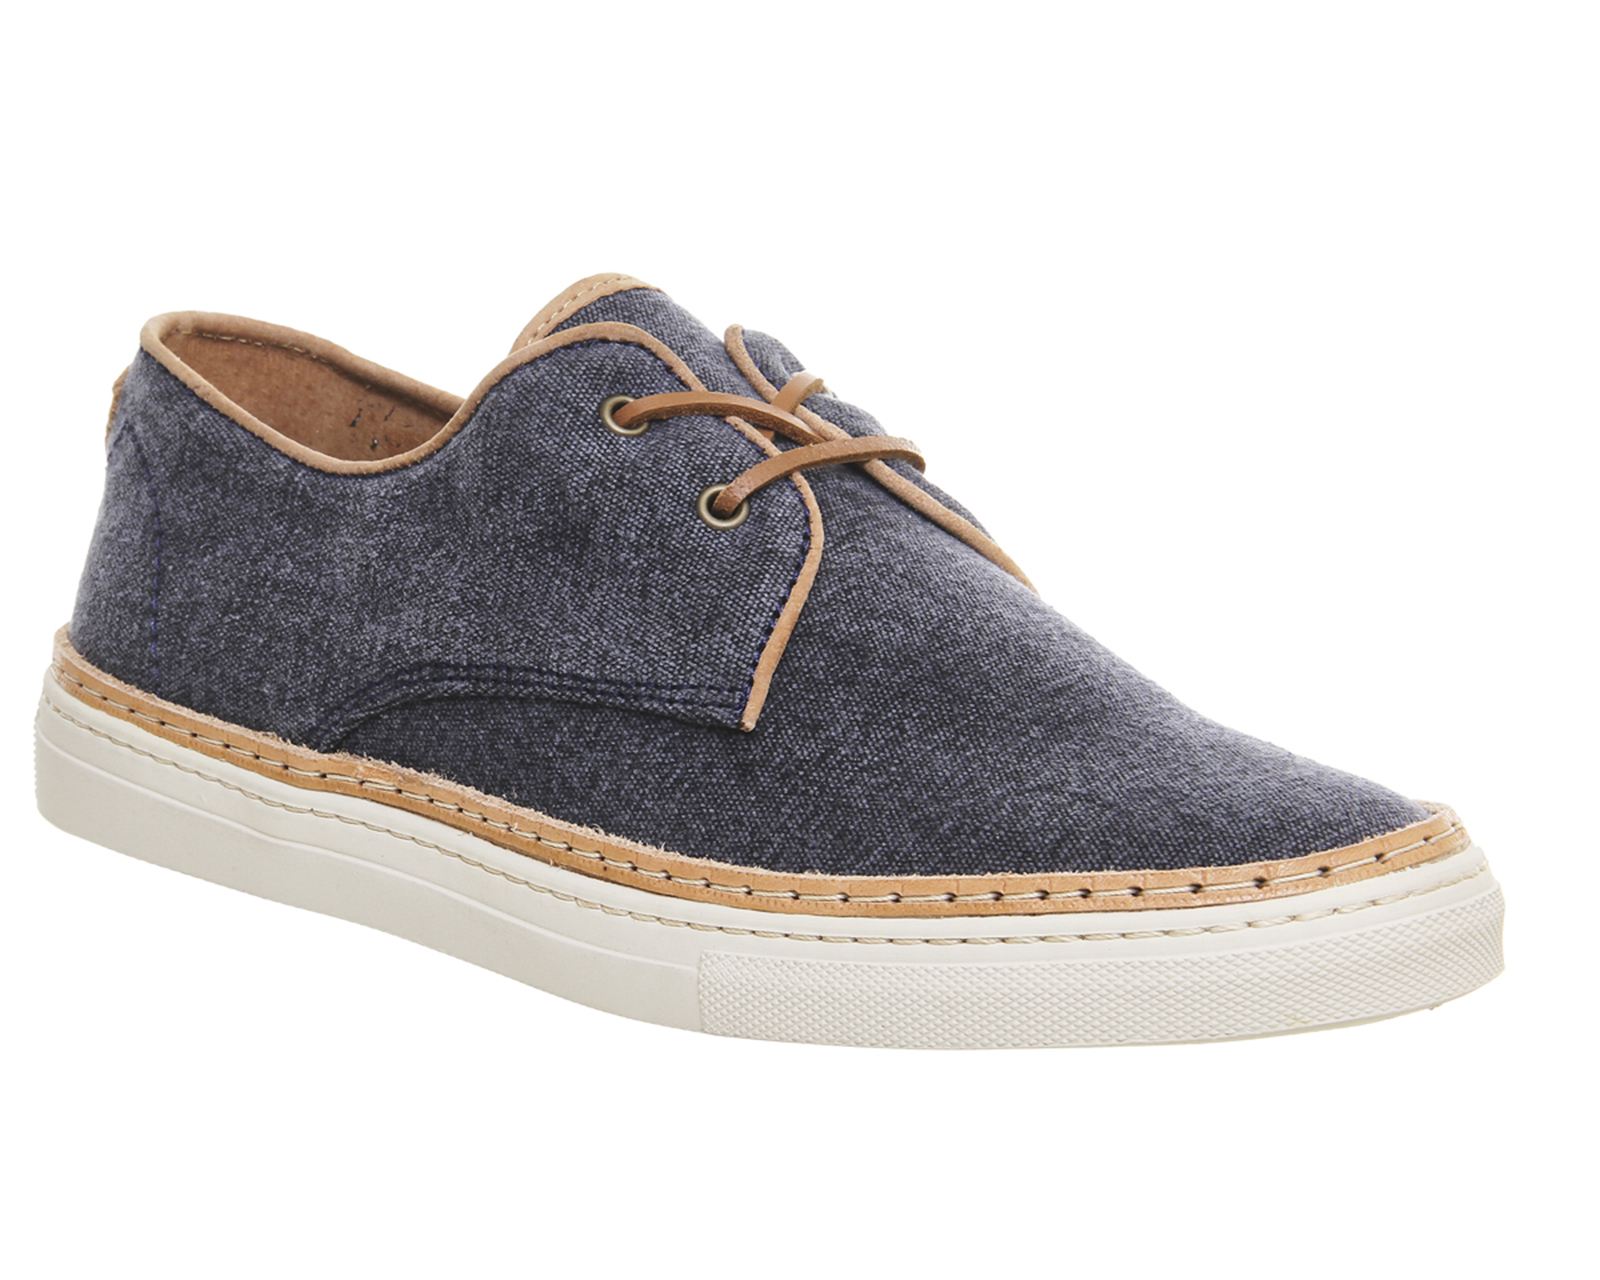 Stow & SonCampbell Lo SneakerWashed Navy Canvas